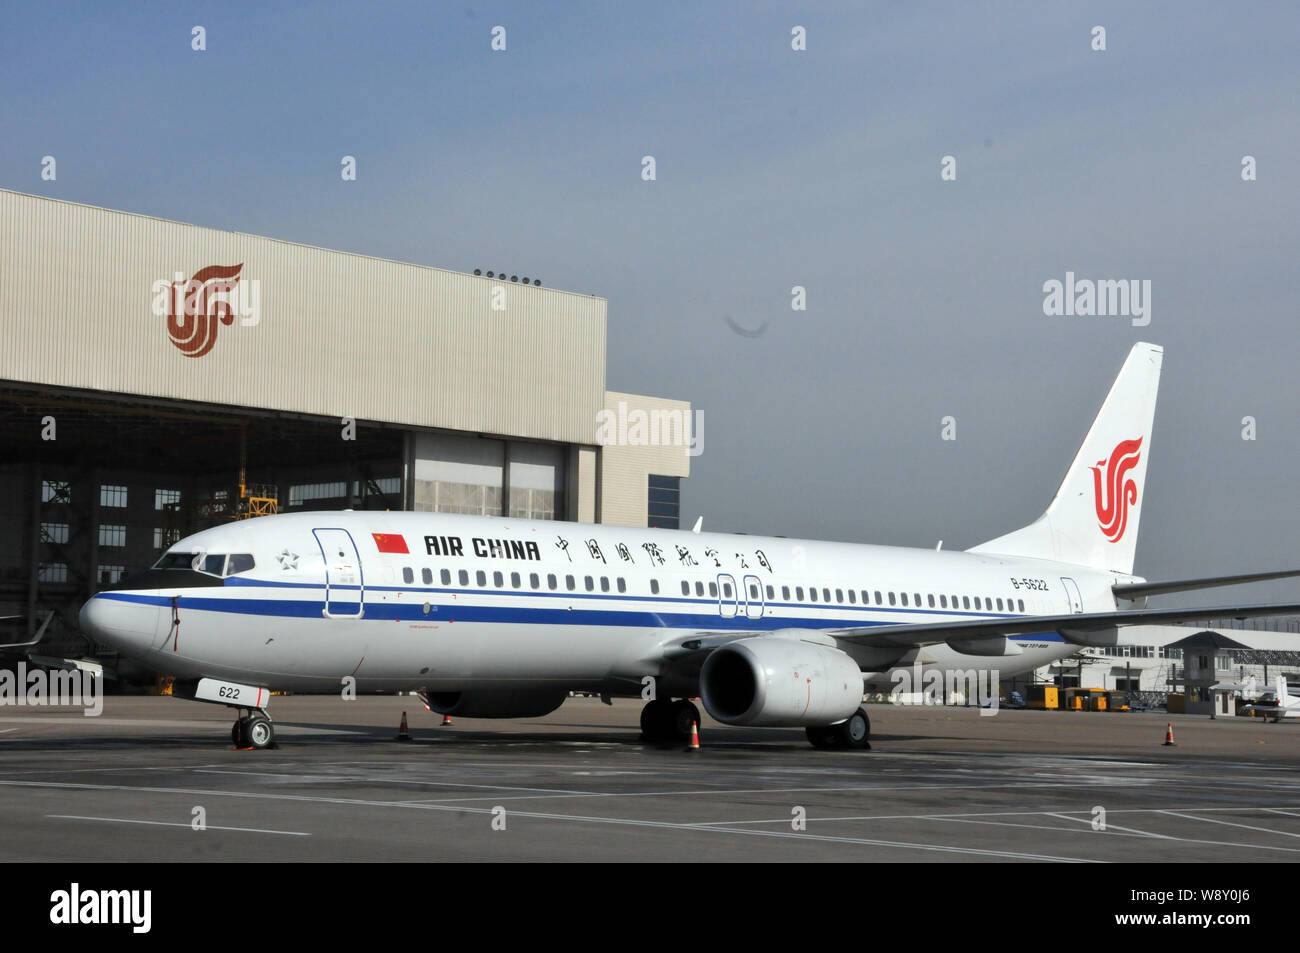 --FILE--A plane of Air China is seen at the Chongqing Jiangbei International Airport in Chongqing, China, 11 May 2013.   Germans Deutsche Lufthansa AG Stock Photo